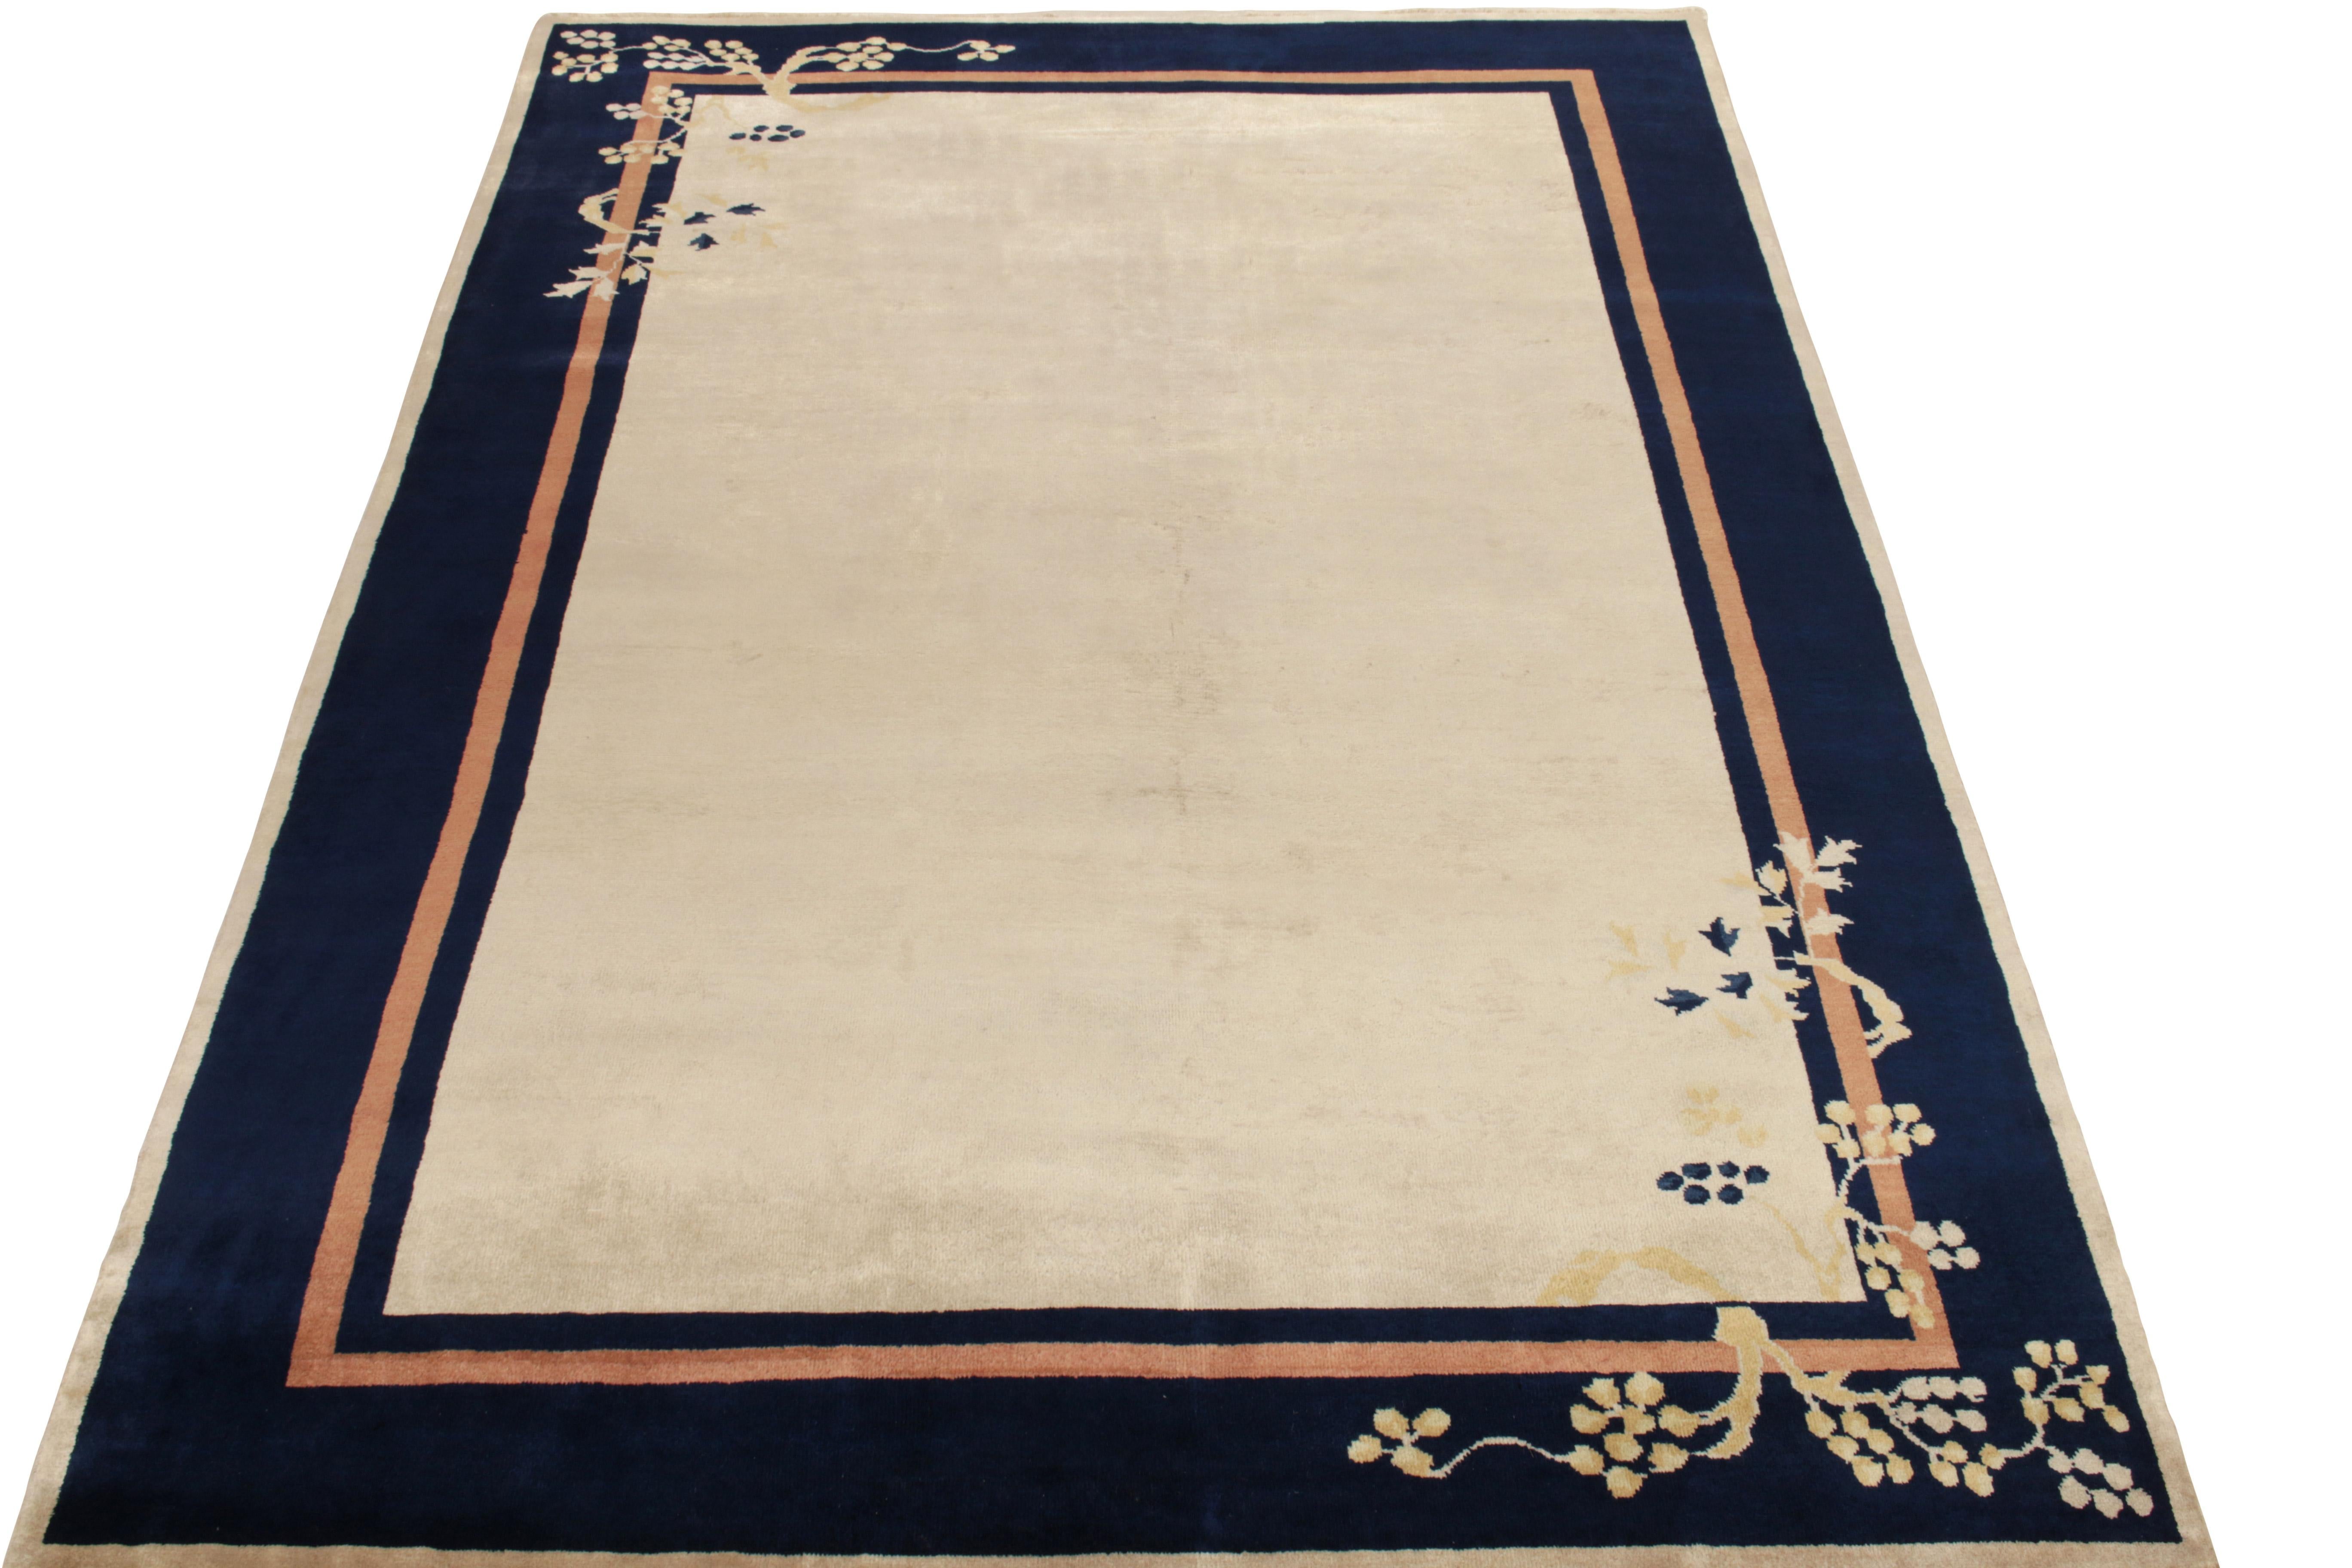 Hand-knotted in wool, a 7x10 vintage piece exemplifying Chinese Art Deco rug aesthetics—among the latest to join Rug & Kilim’s Antique & Vintage collection. The bejewelled piece showcases a luscious cream open field beautifully encased in